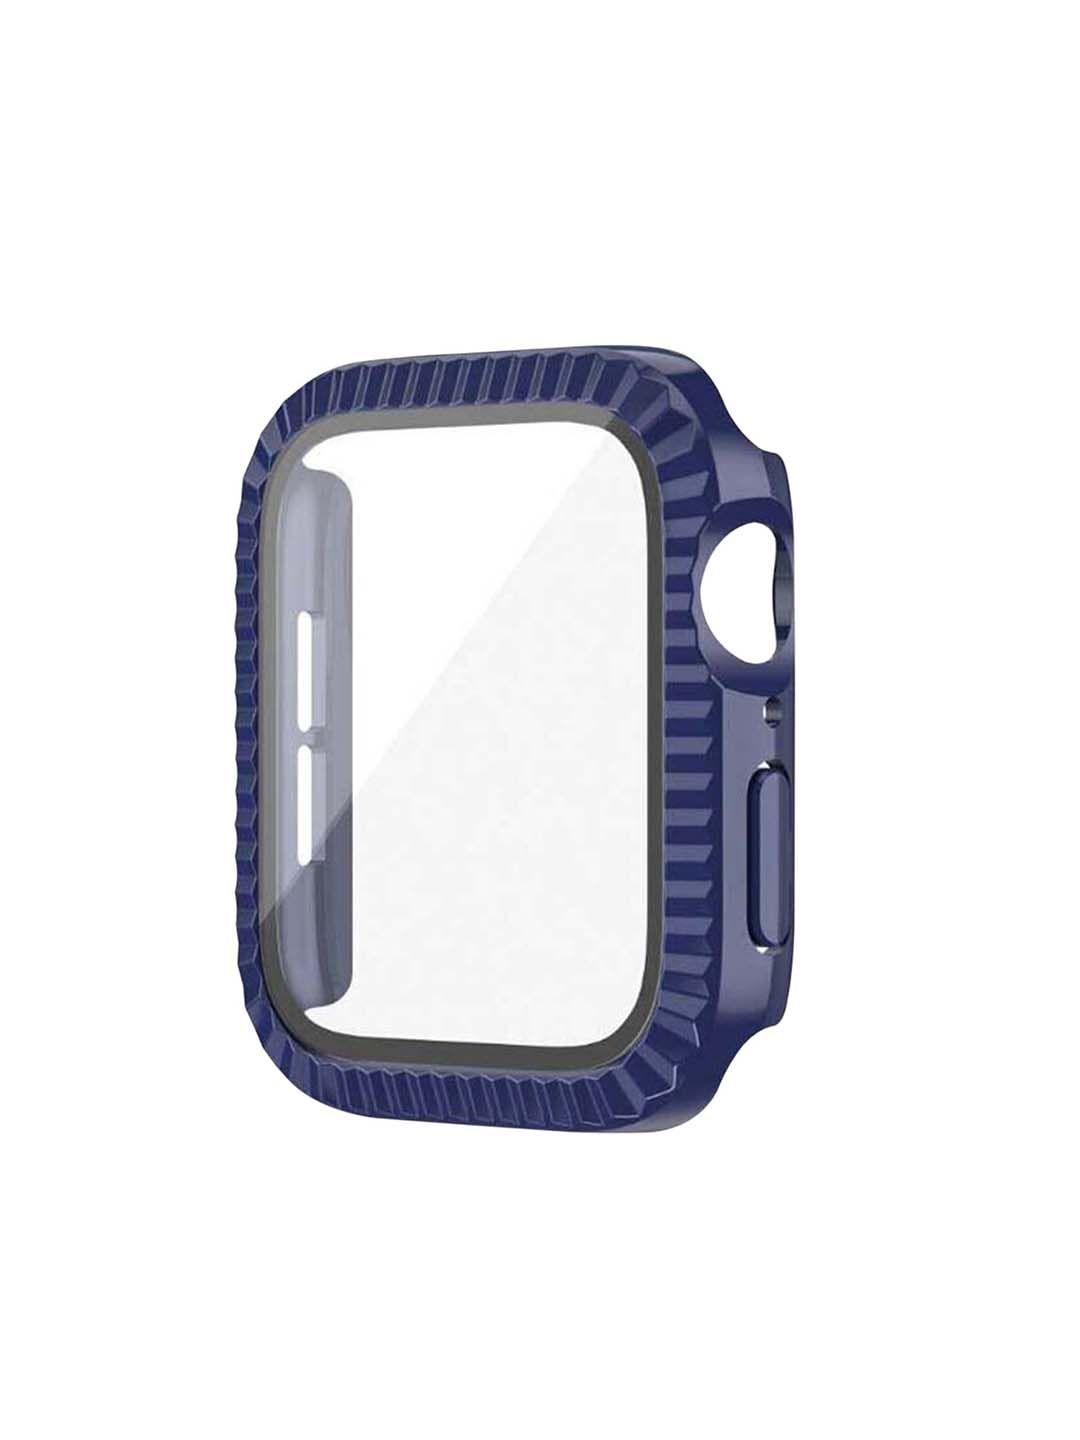 dailyobjects ribbed fit apple watch series case with screen protector